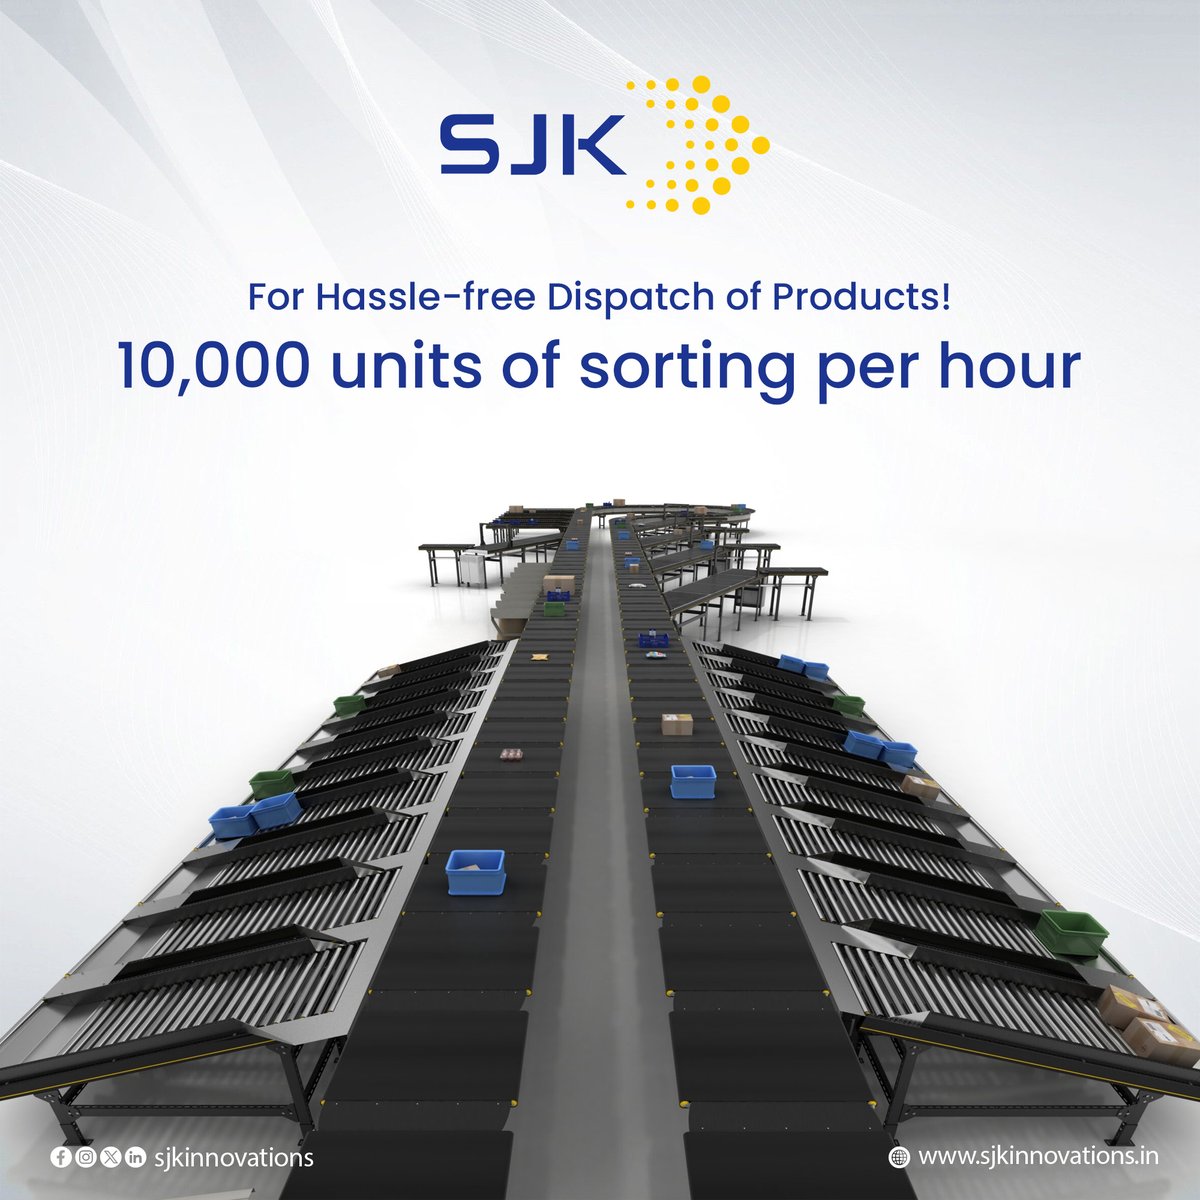 Streamline your dispatch process! At SJK Innovations, we provide integrated solutions for all your warehousing needs. Discover the future of efficient operations with our Sortation Systems! 
.
.
#sjk #sjkinnovations #warehouse #conveyor #conveyors #technology #warehouseoperative